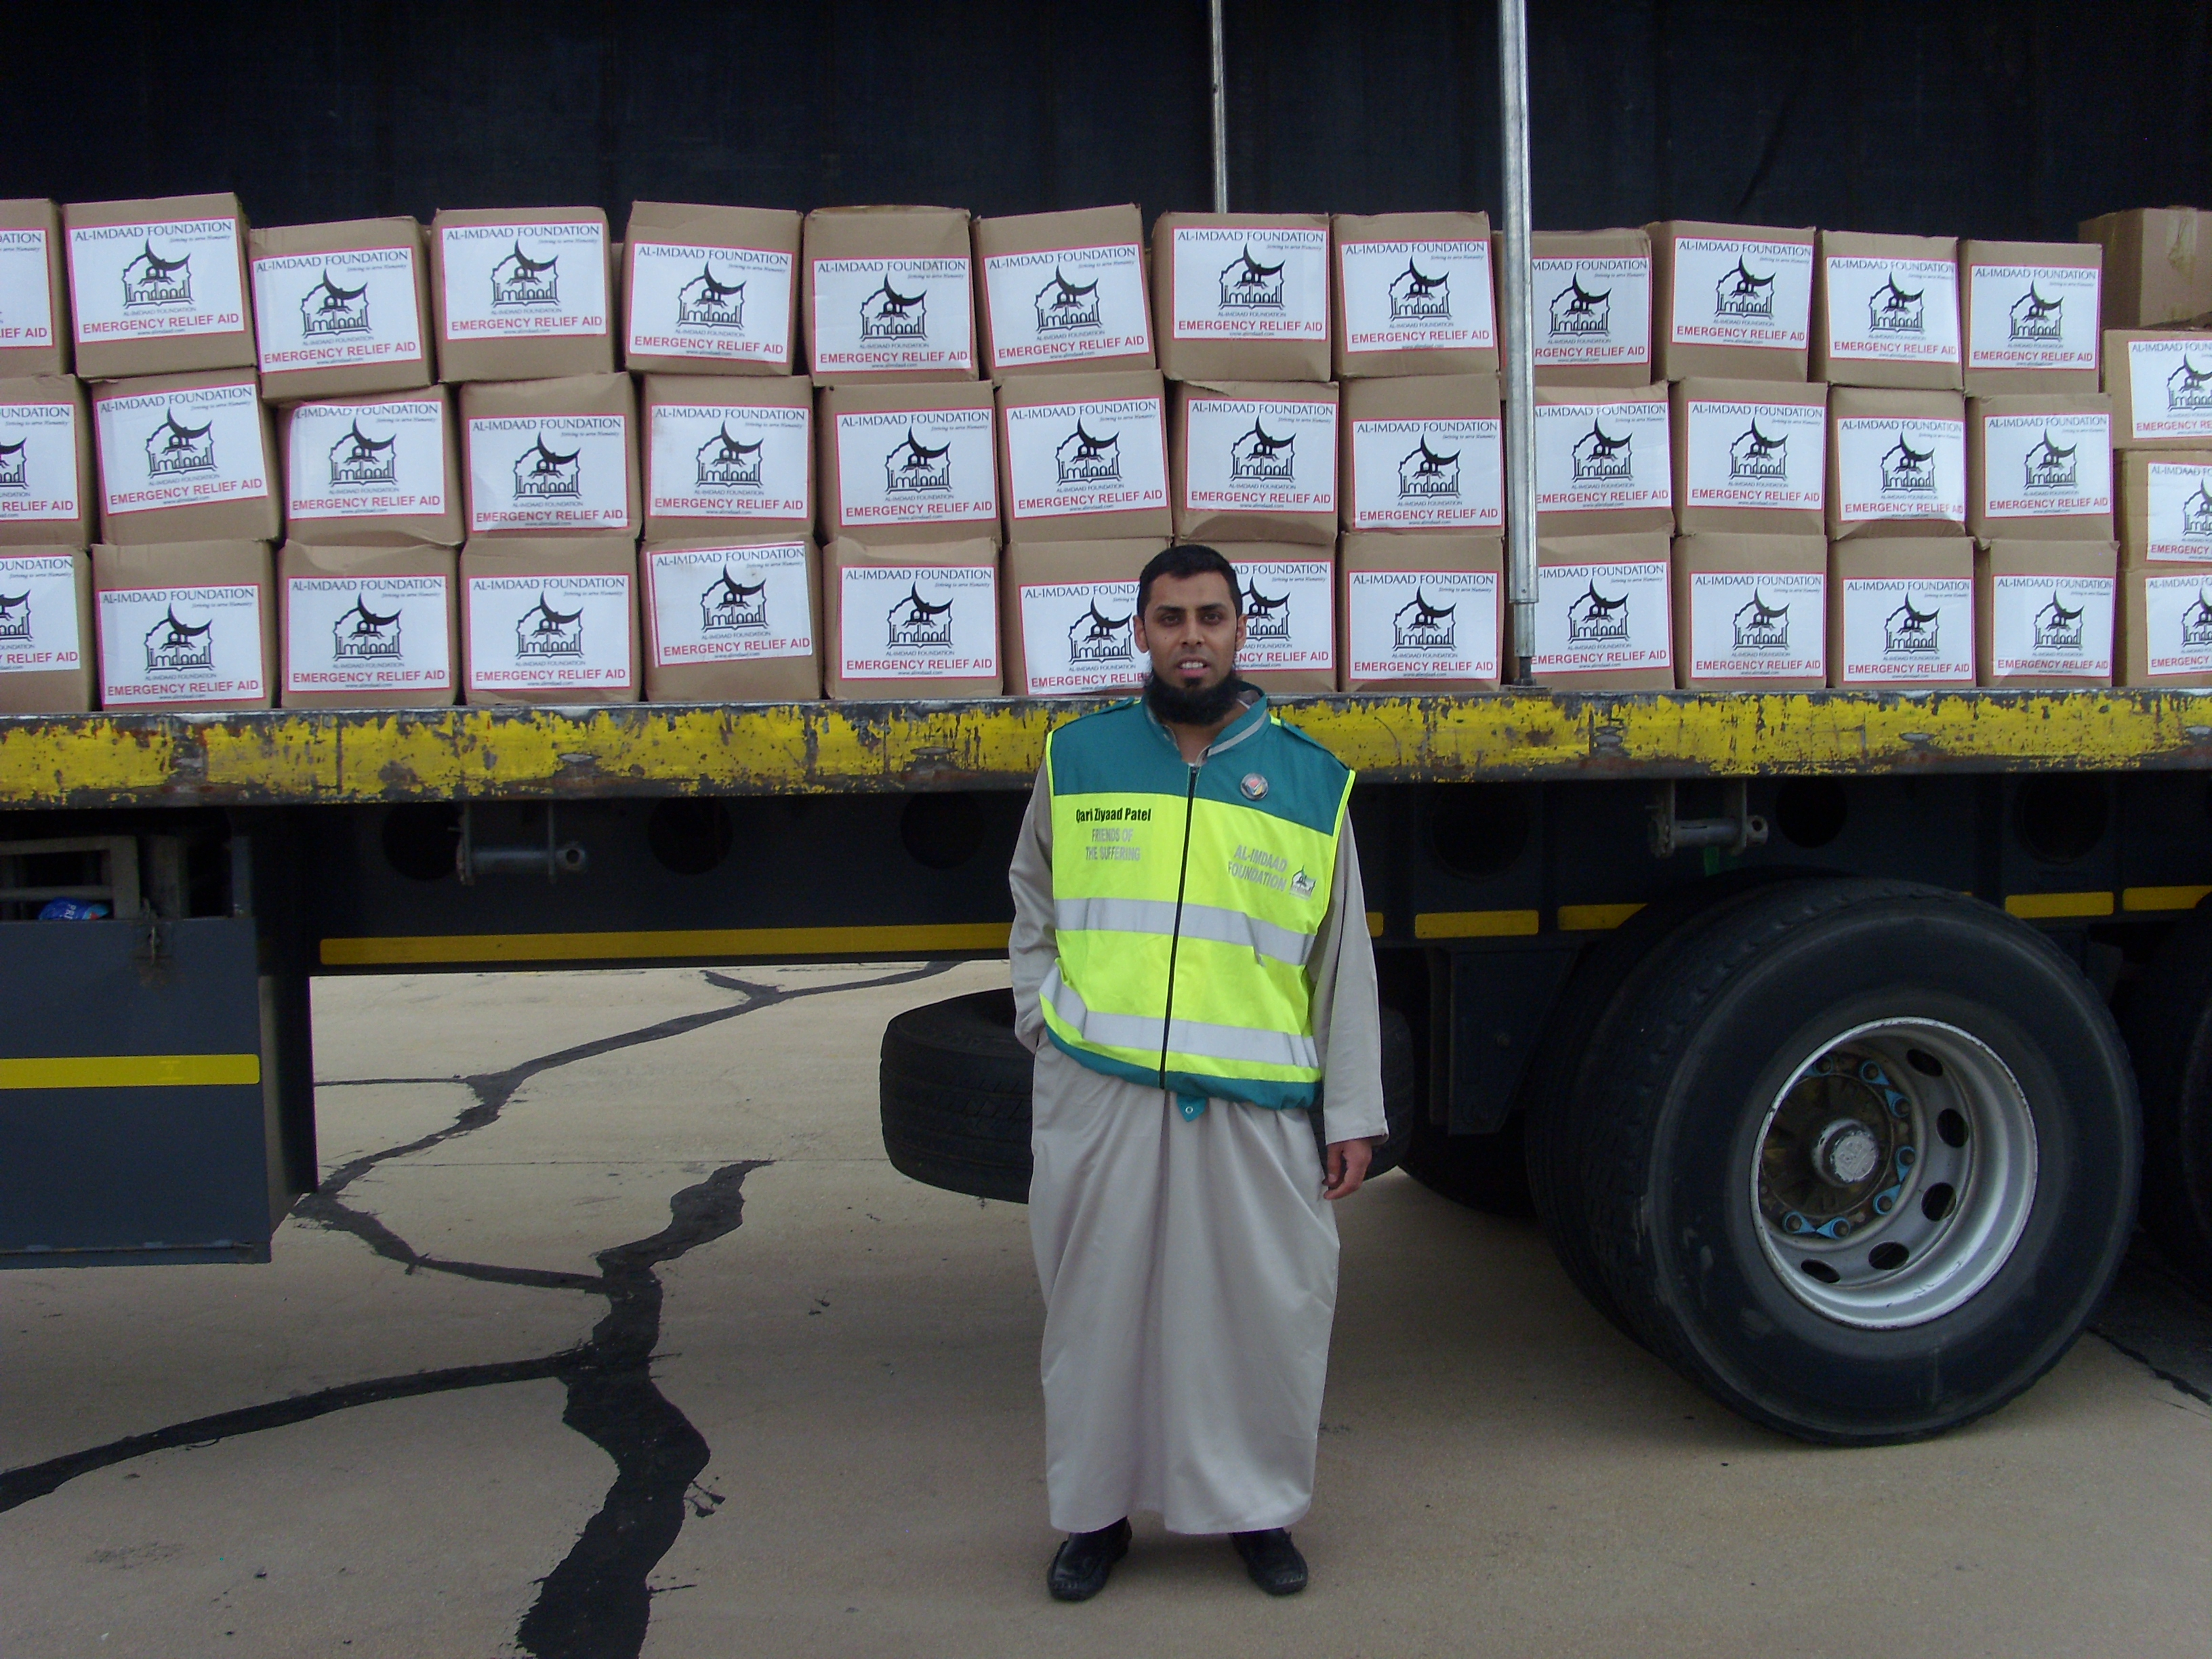 The relief aid comprised high valued food hampers, tents, water purification tablets and blankets